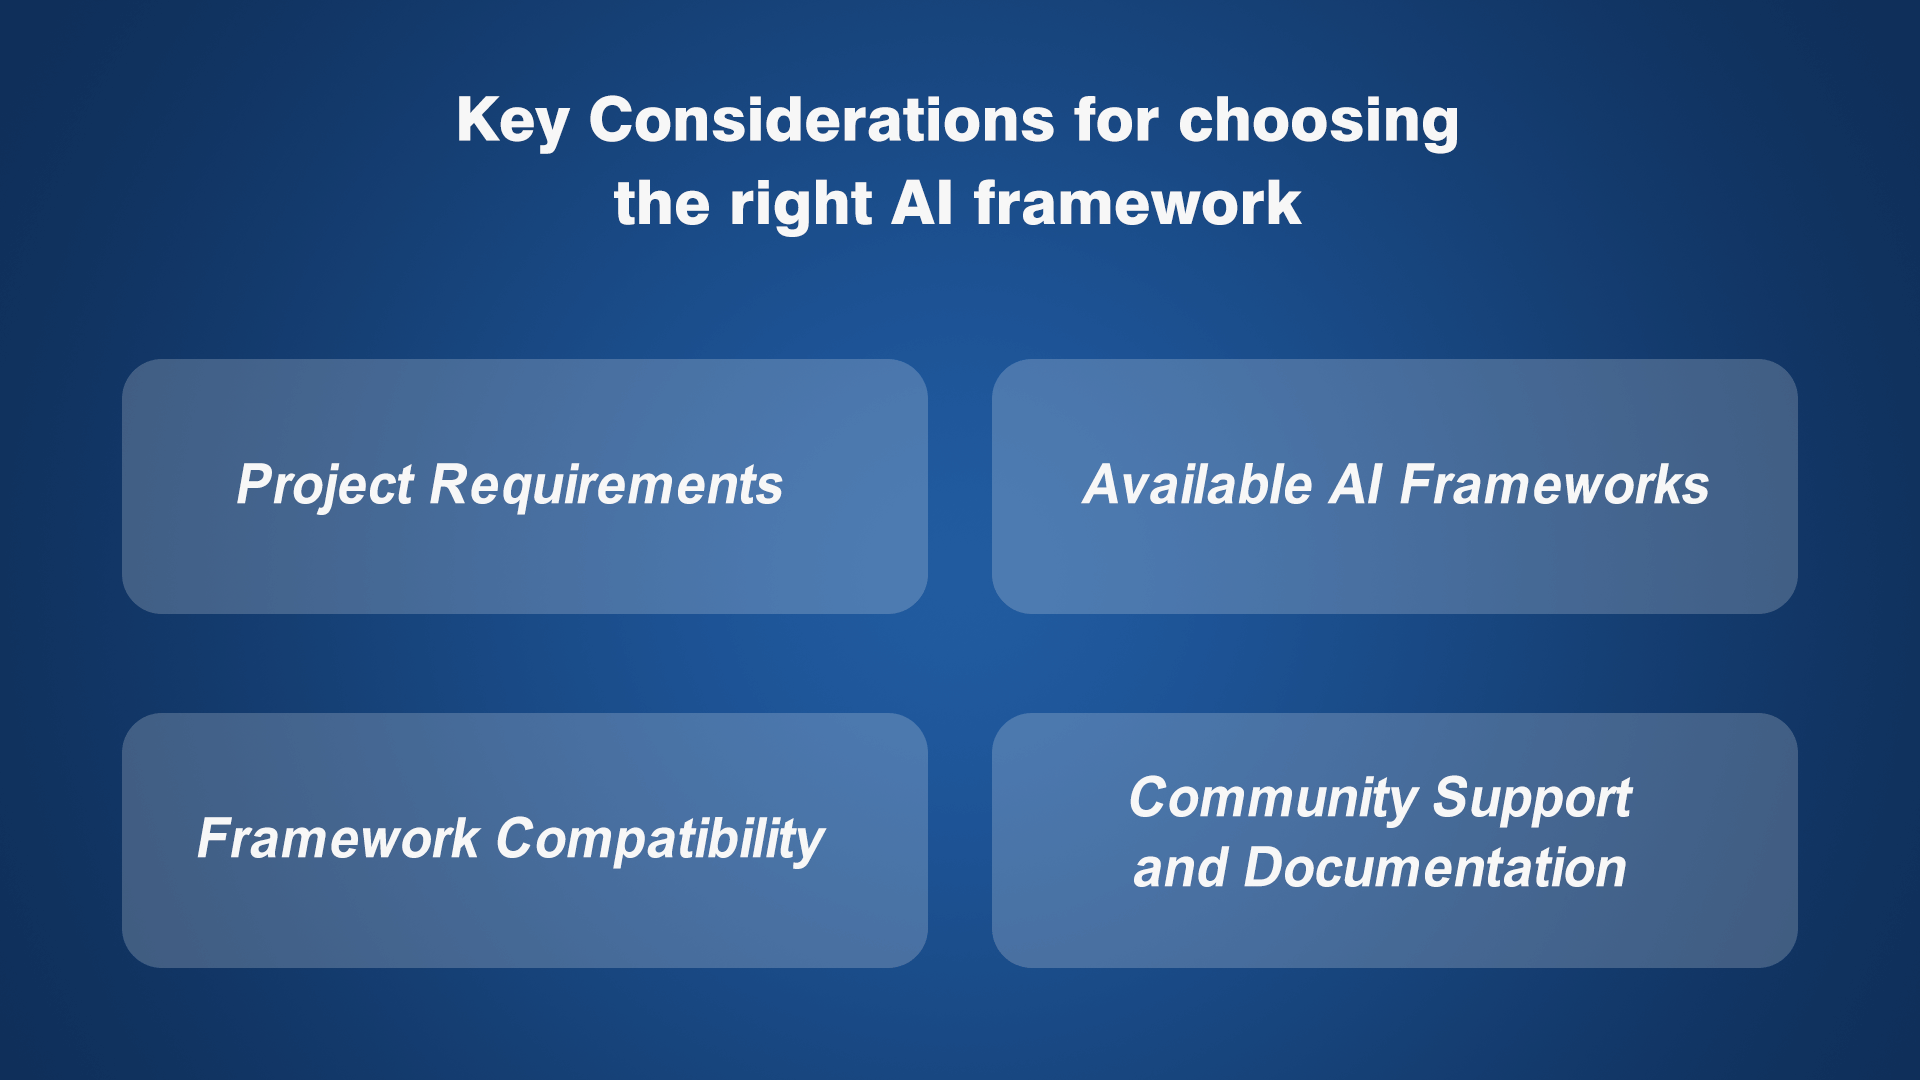 Key Considerations for choosing the right AI framework